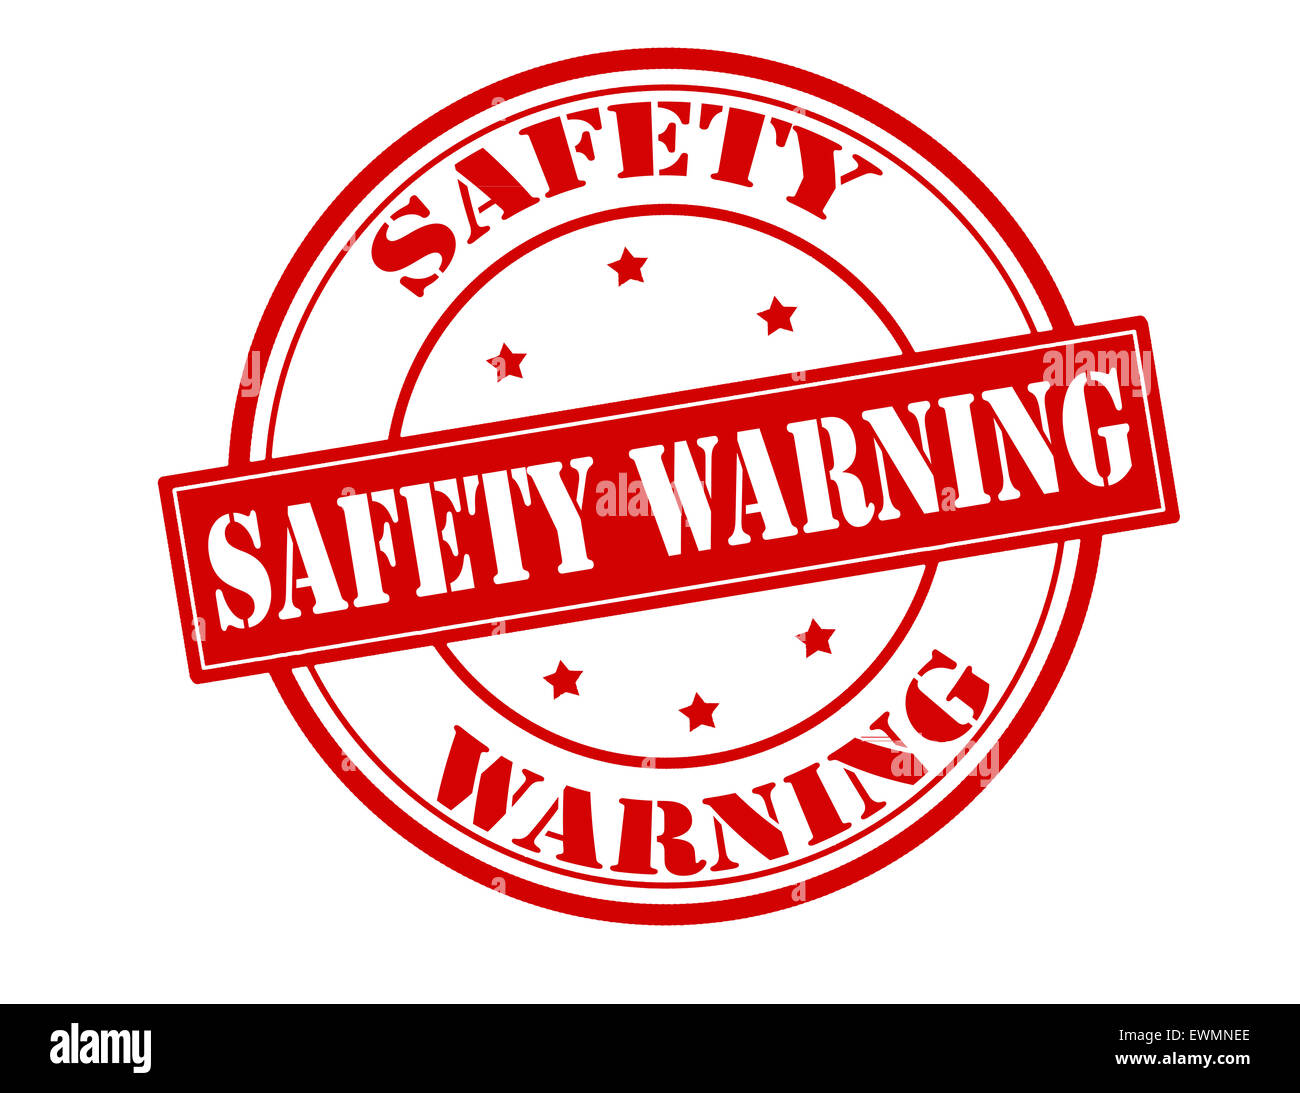 Rubber stamp with text safety warning inside, illustration Stock Photo